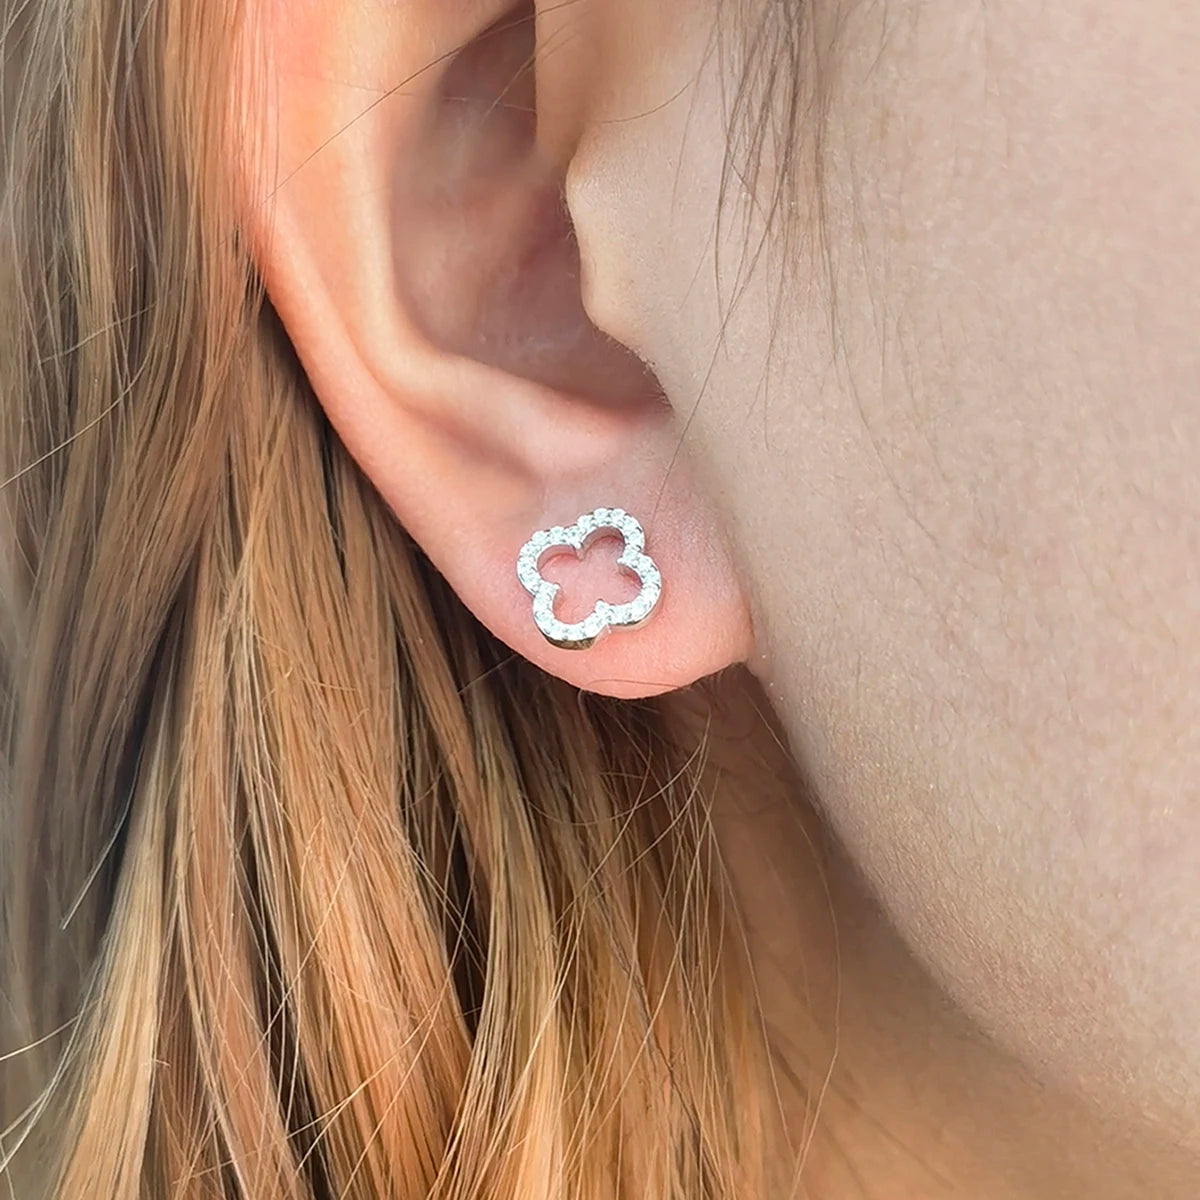 IceBox DC: Hollow Clover Earrings with Micro-Inlaid Zircon ✨